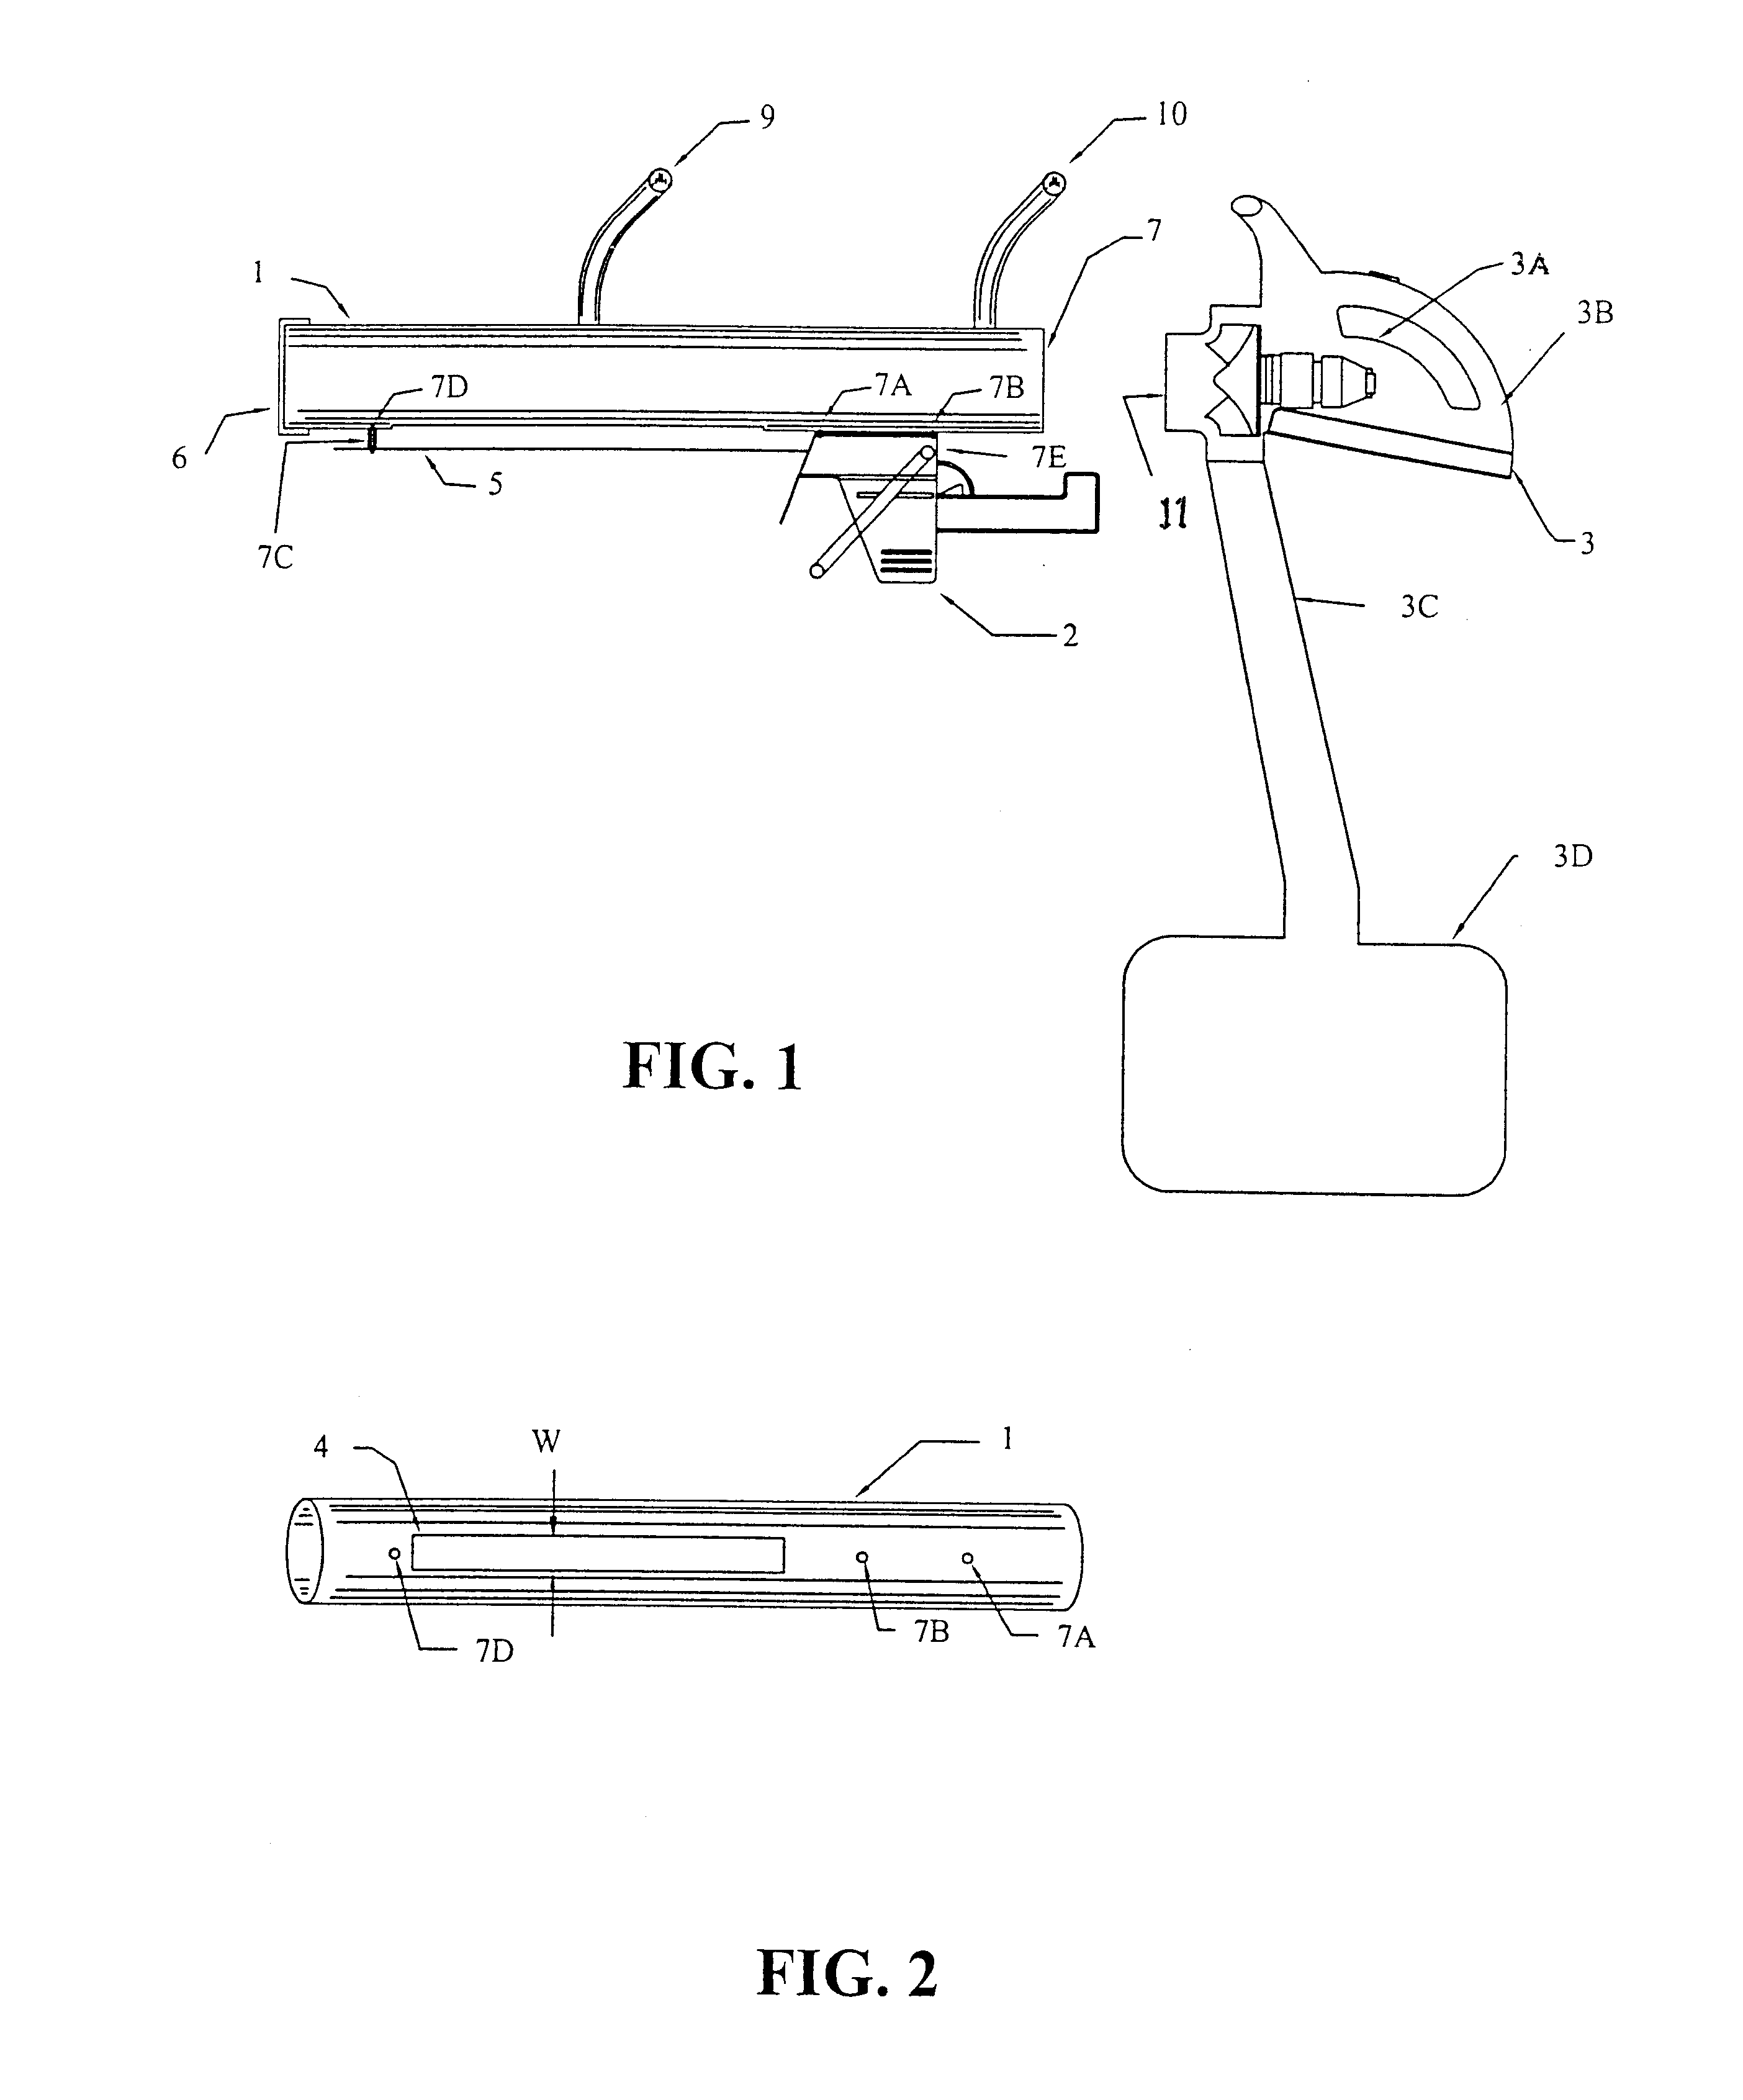 Clippings catcher attachment for combined trimmer and vacuum apparatus